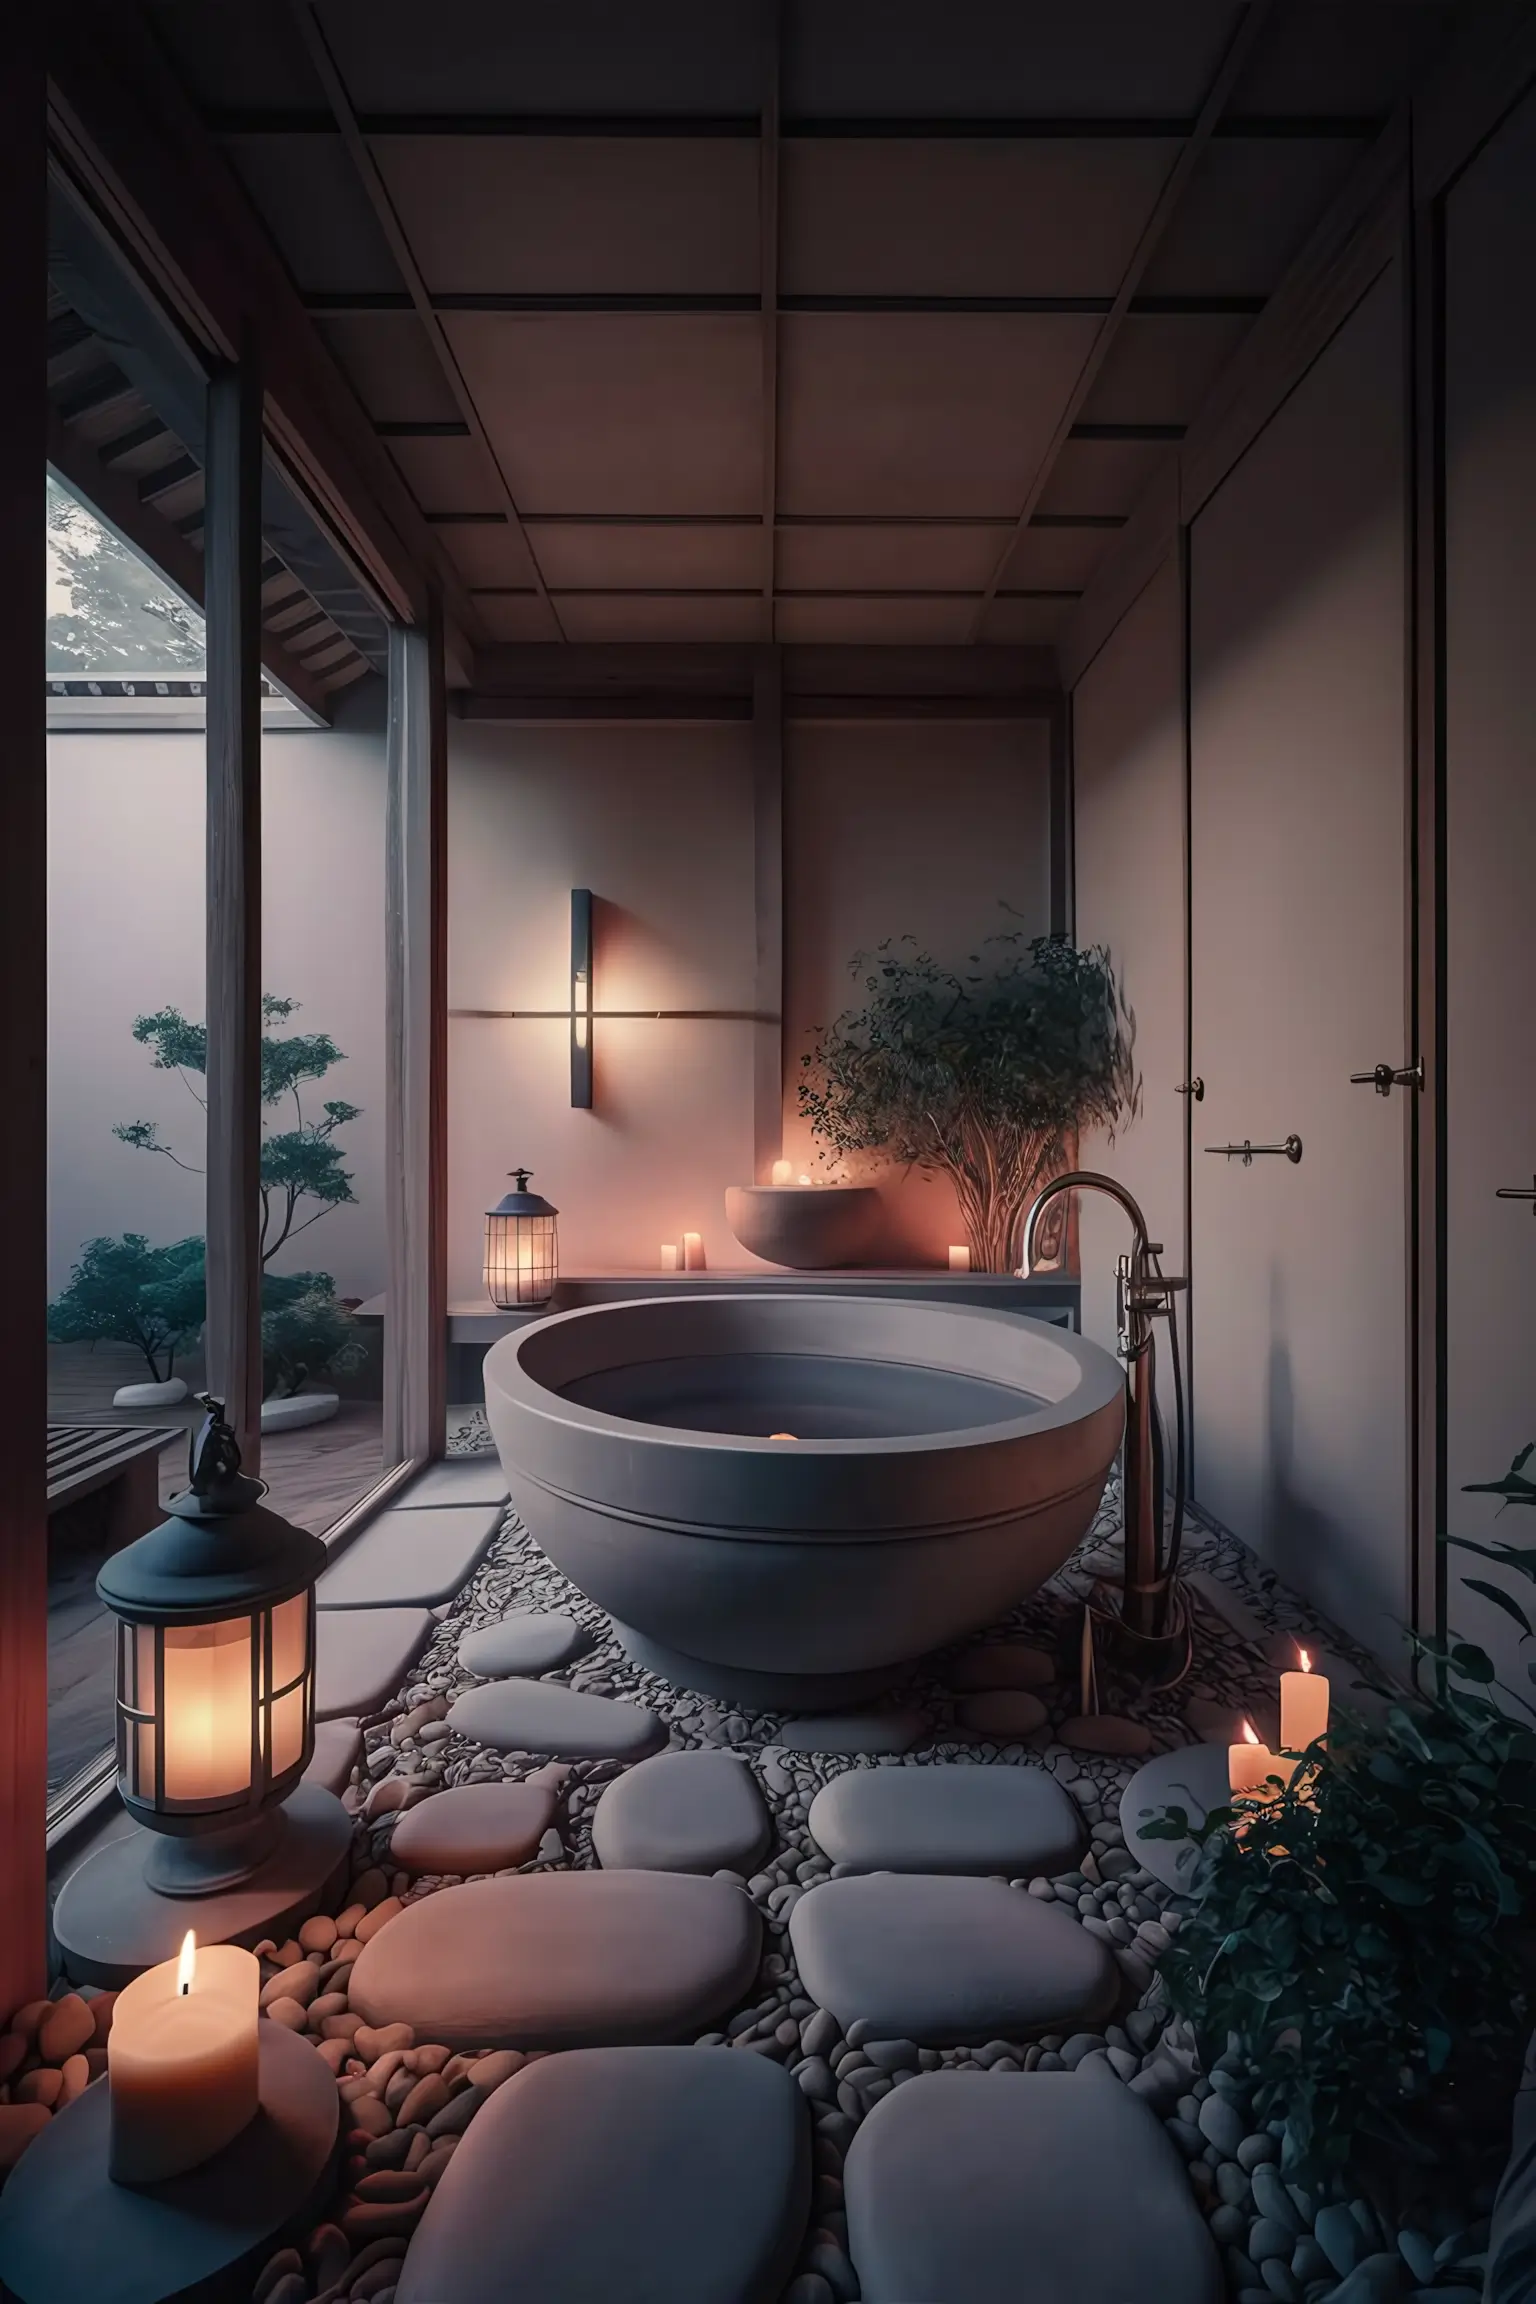 Zen-inspired bathroom with soft, warm lighting including lantern-style fixtures and candles.